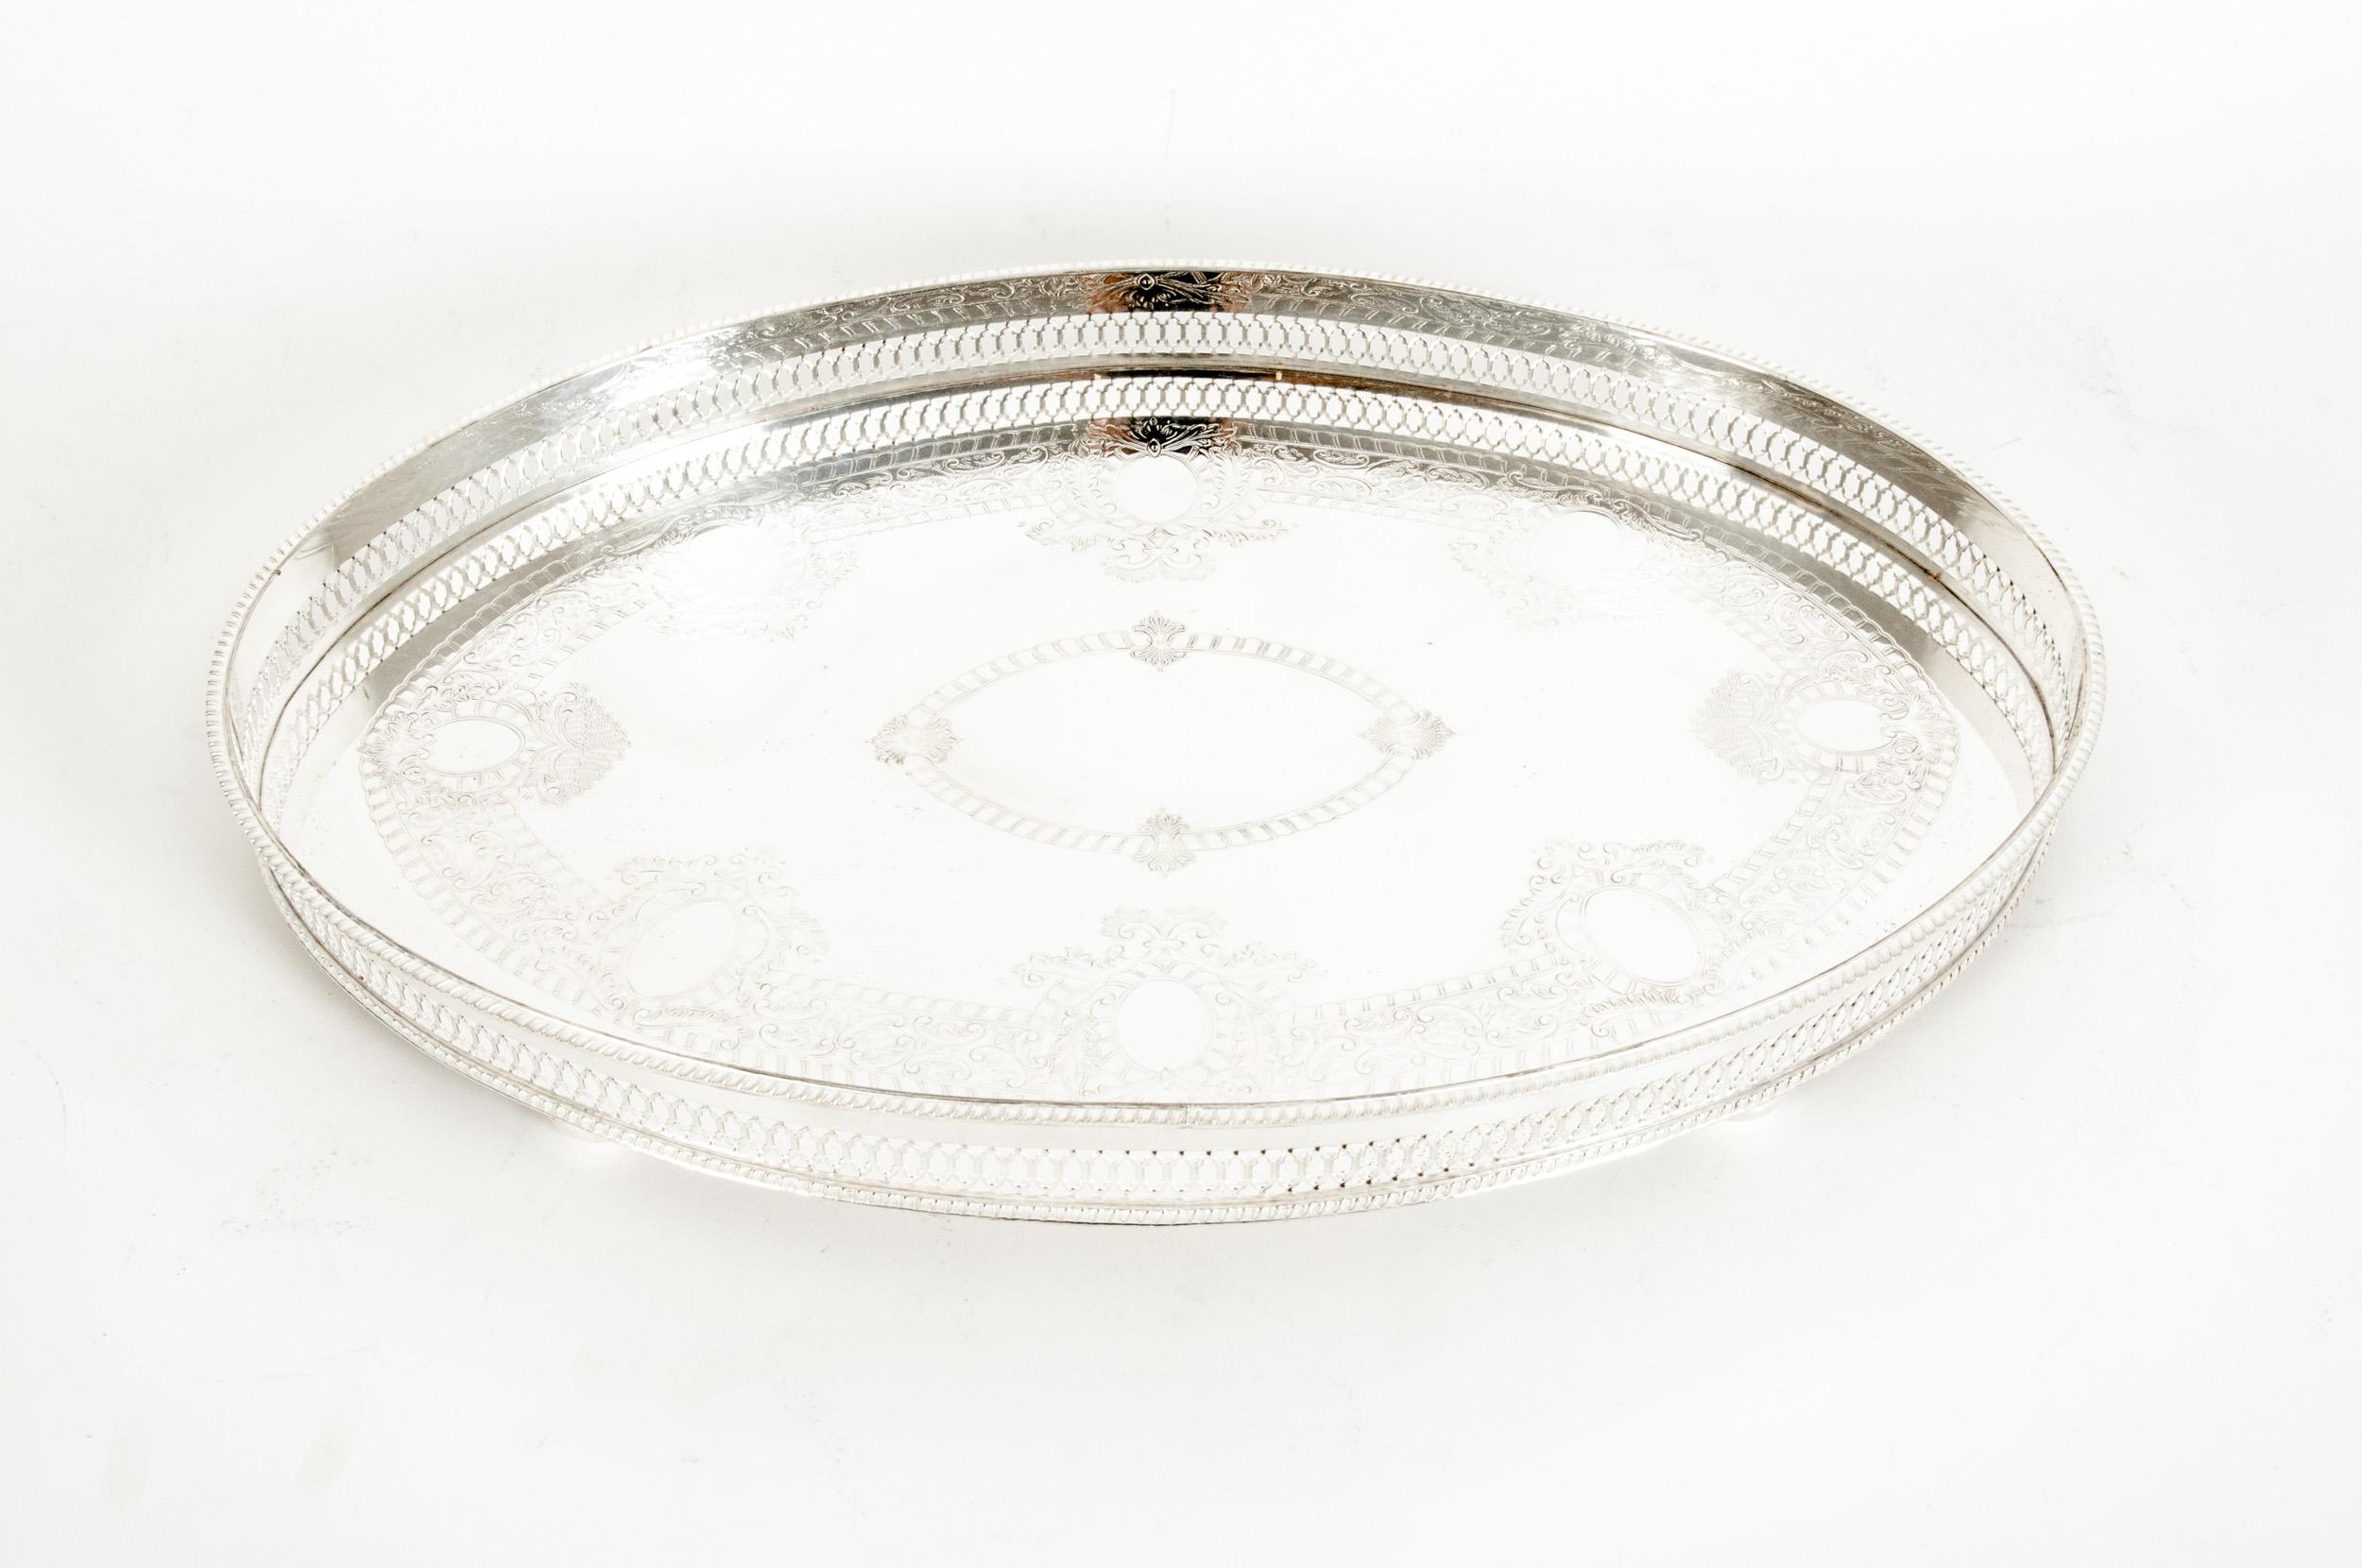 Mid-20th Century English Sheffield Silver Plated Oval Barware / Tableware Tray